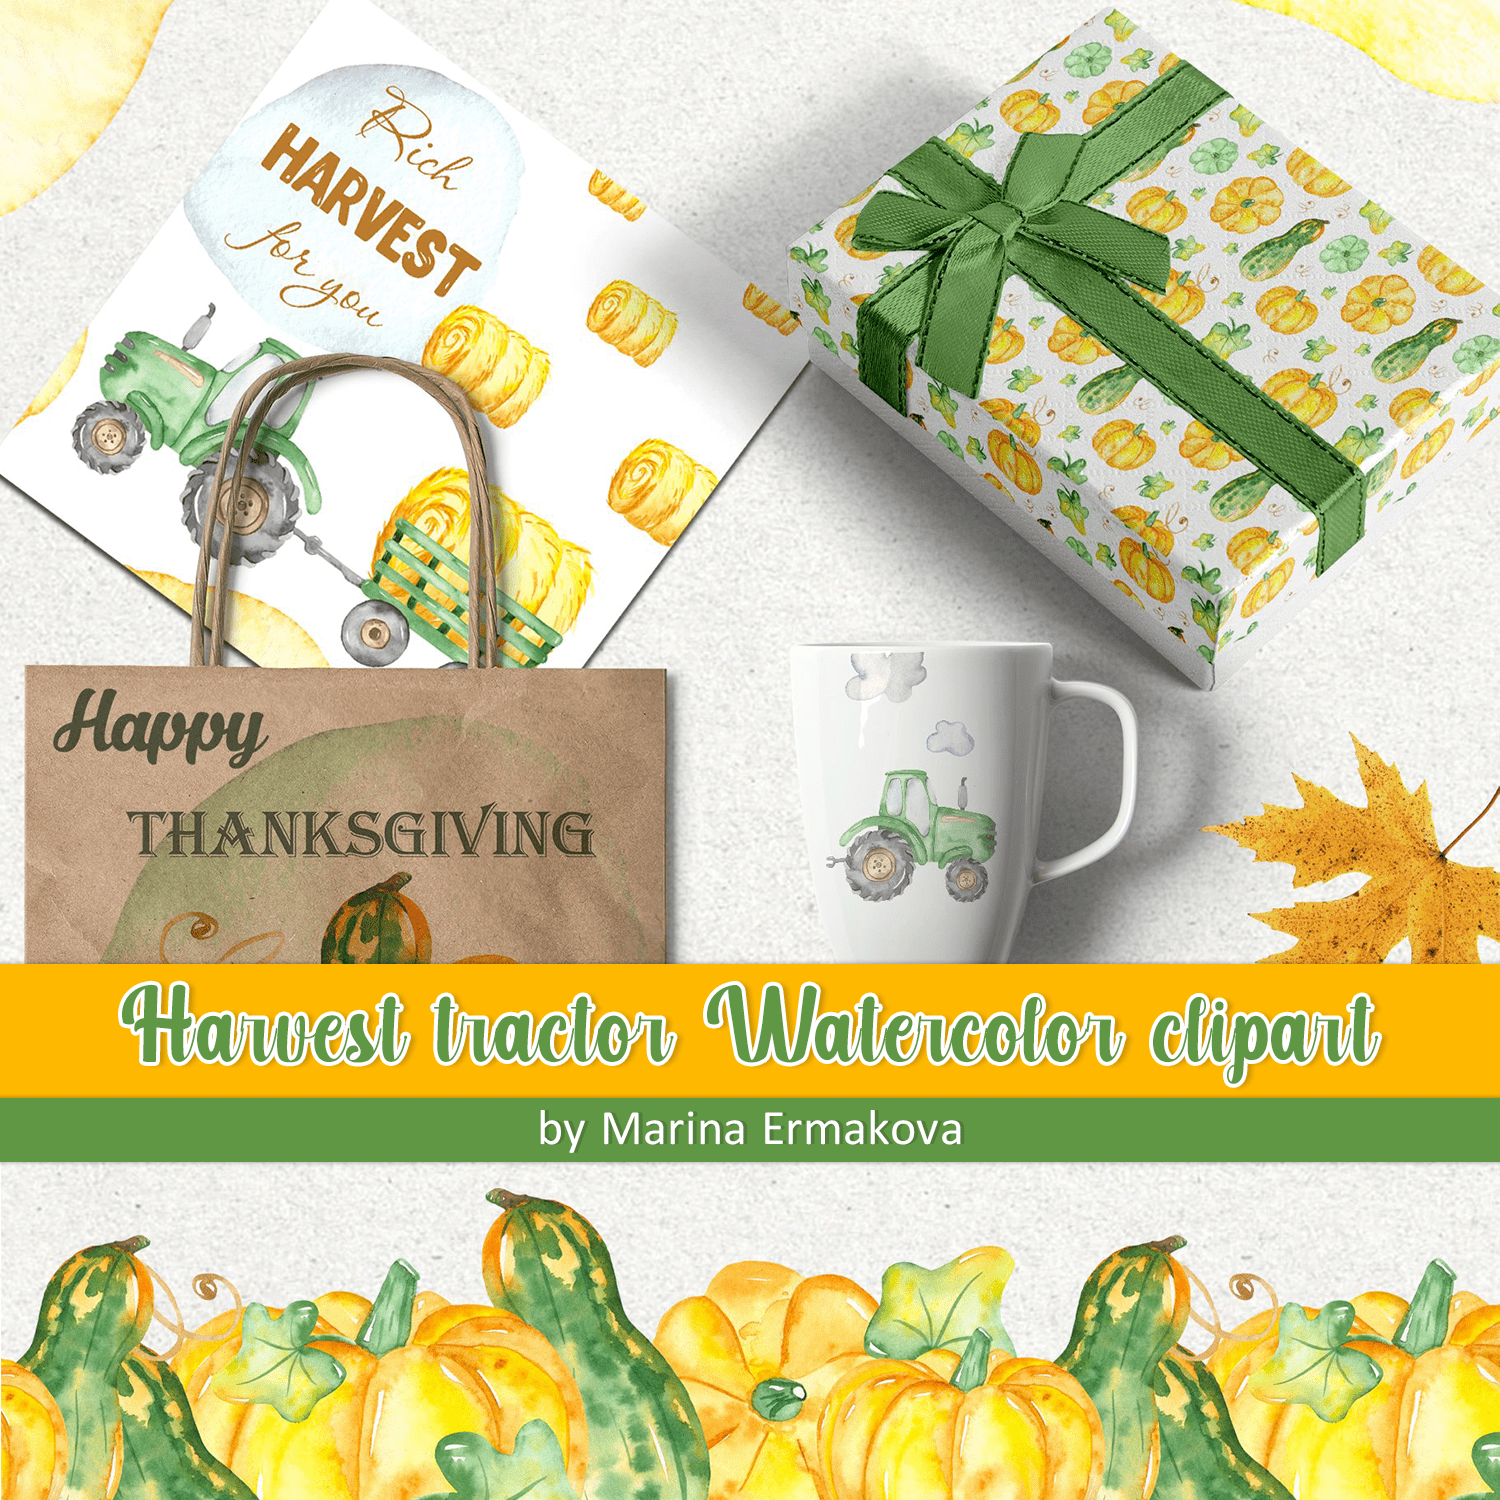 Harvest tractor Watercolor clipart cover.